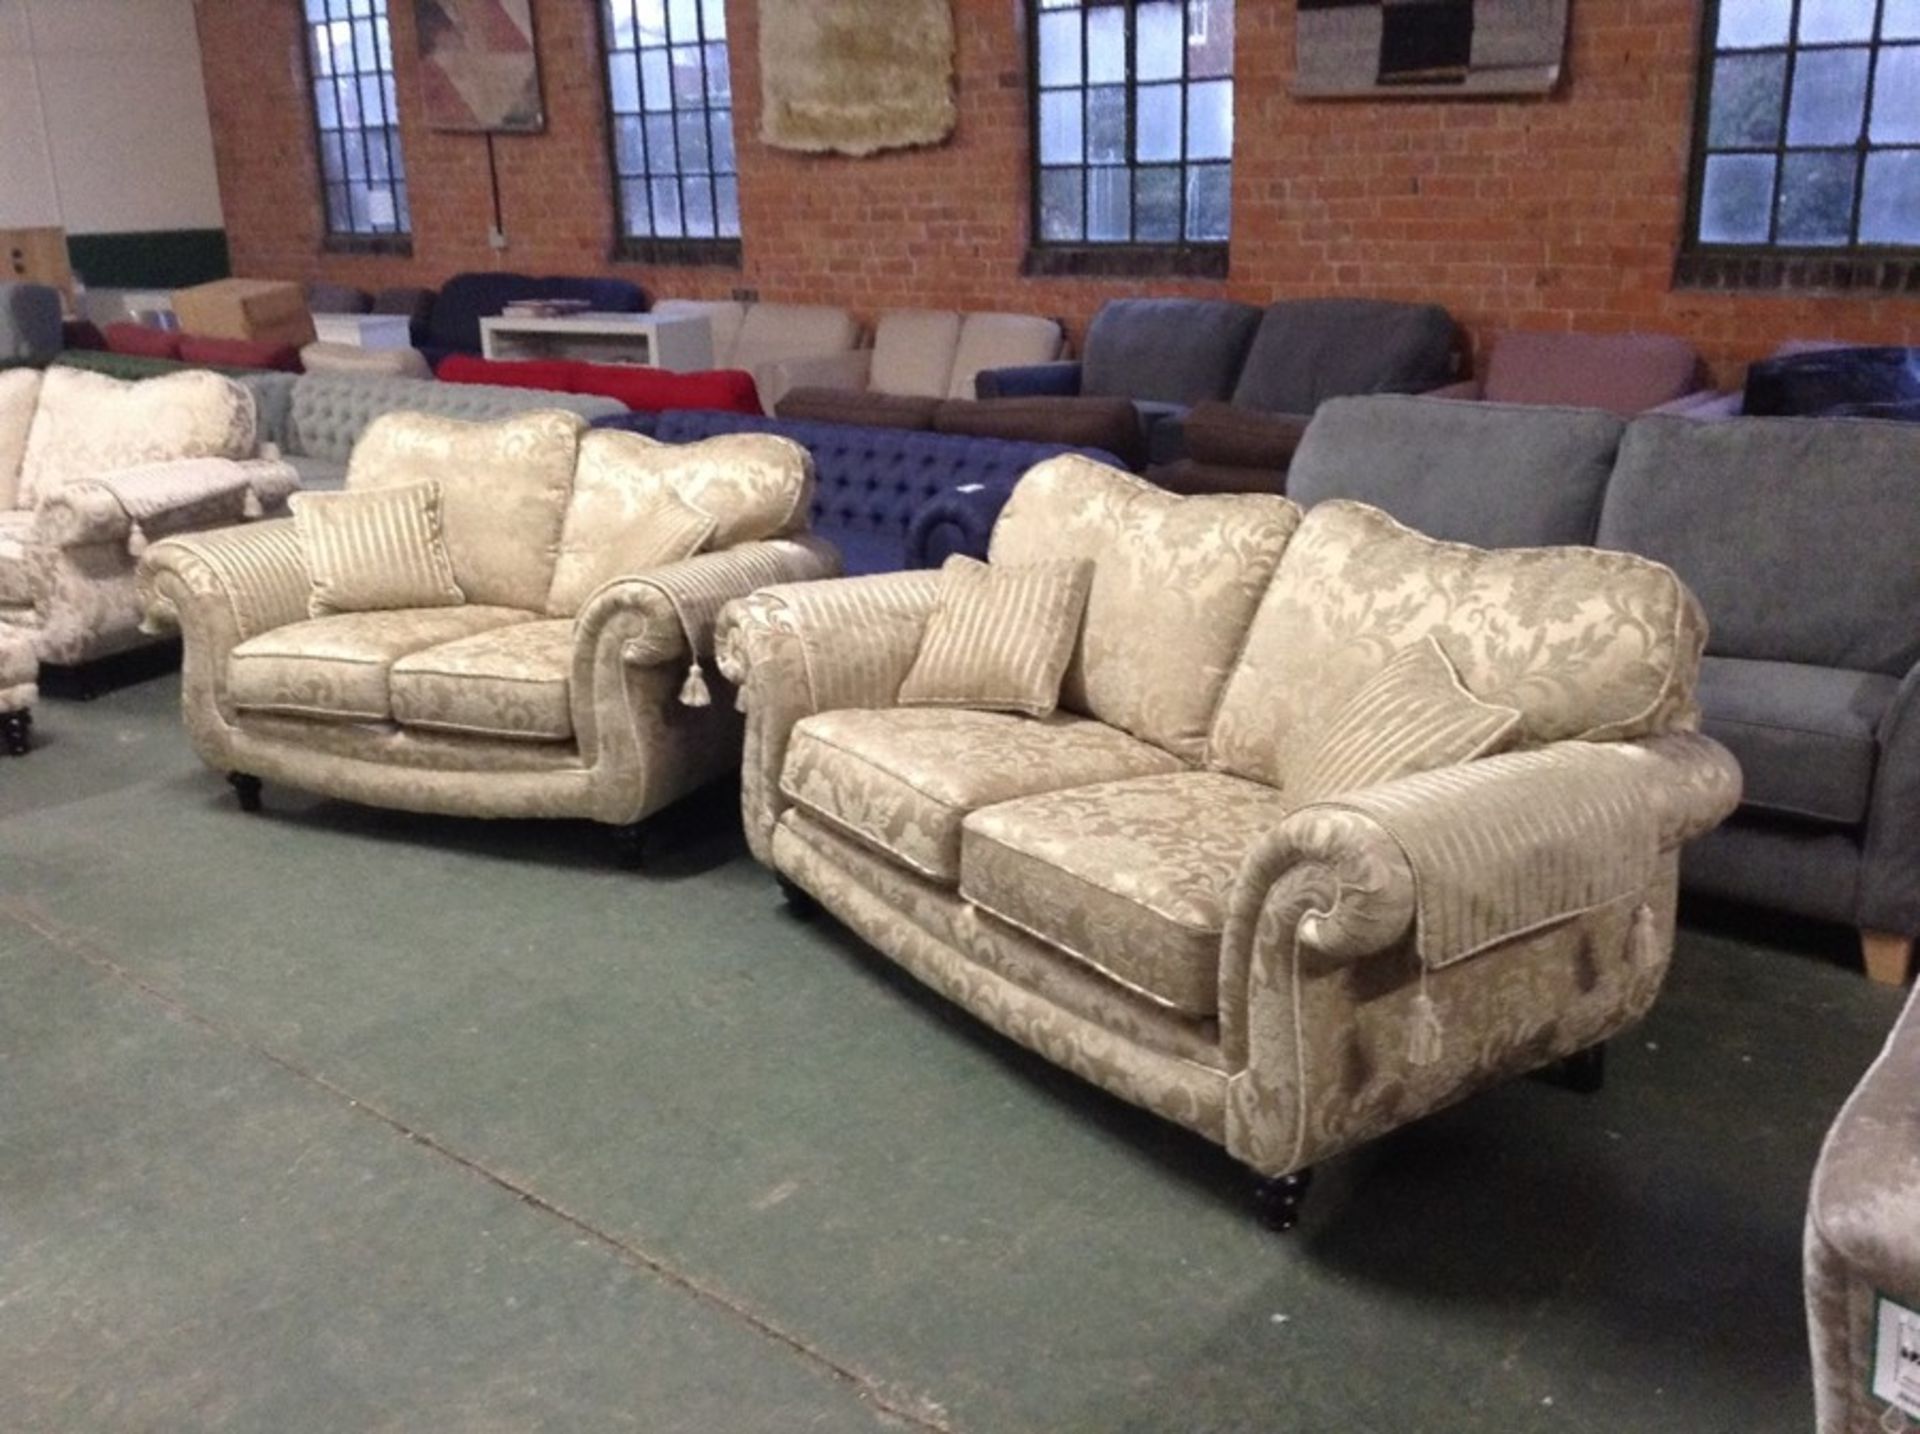 GOLD & FLORAL PATTERNED 3 SEATER SOFA & 2 SEATER S